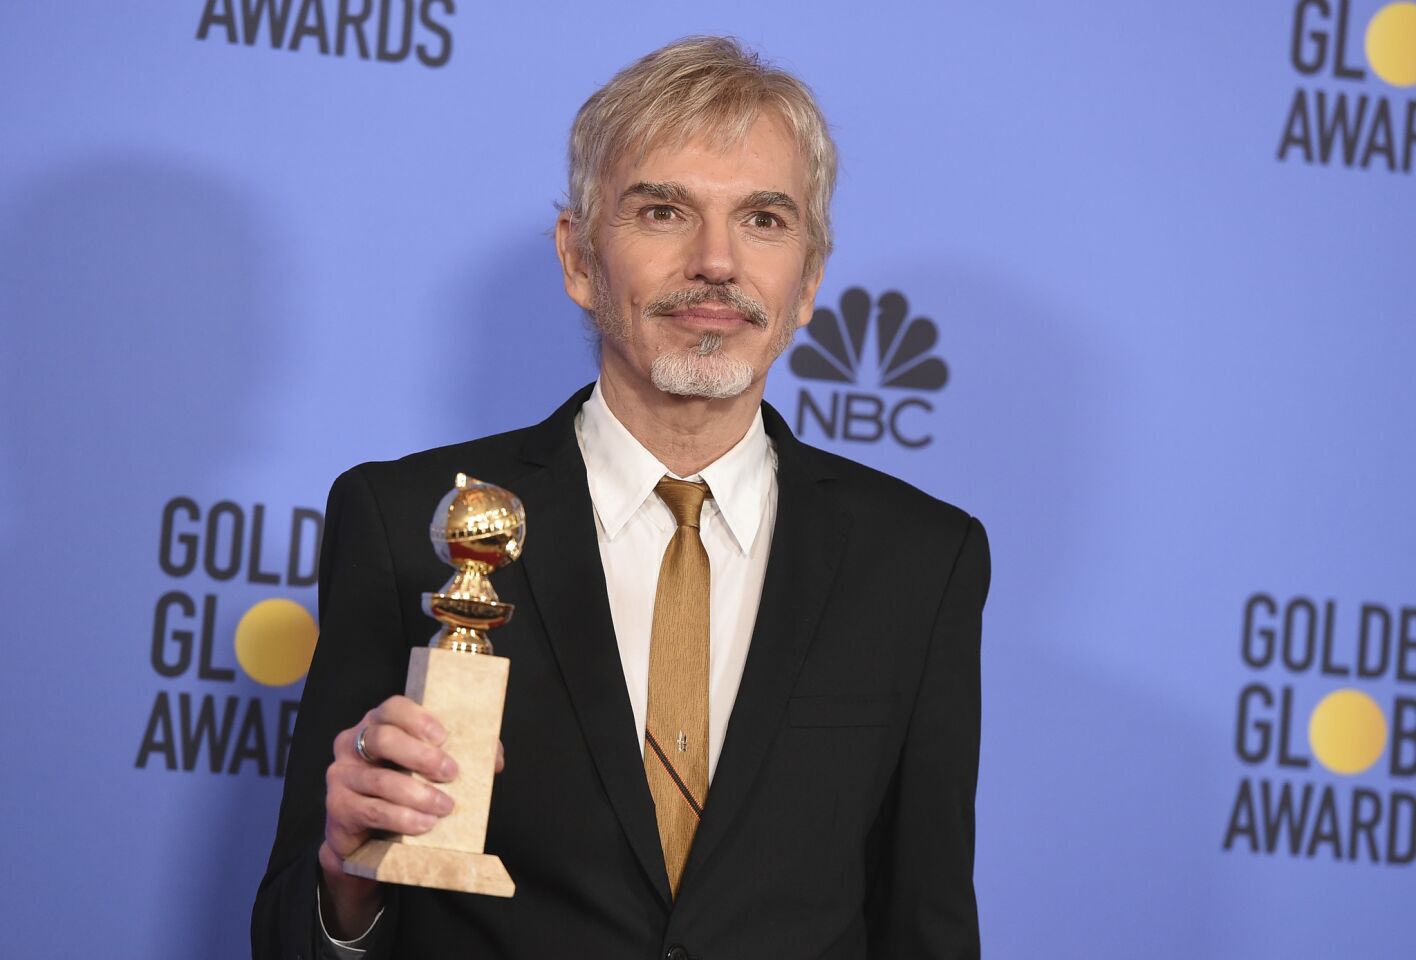 Billy Bob Thornton with his award for lead actor in a TV drama for "Goliath."